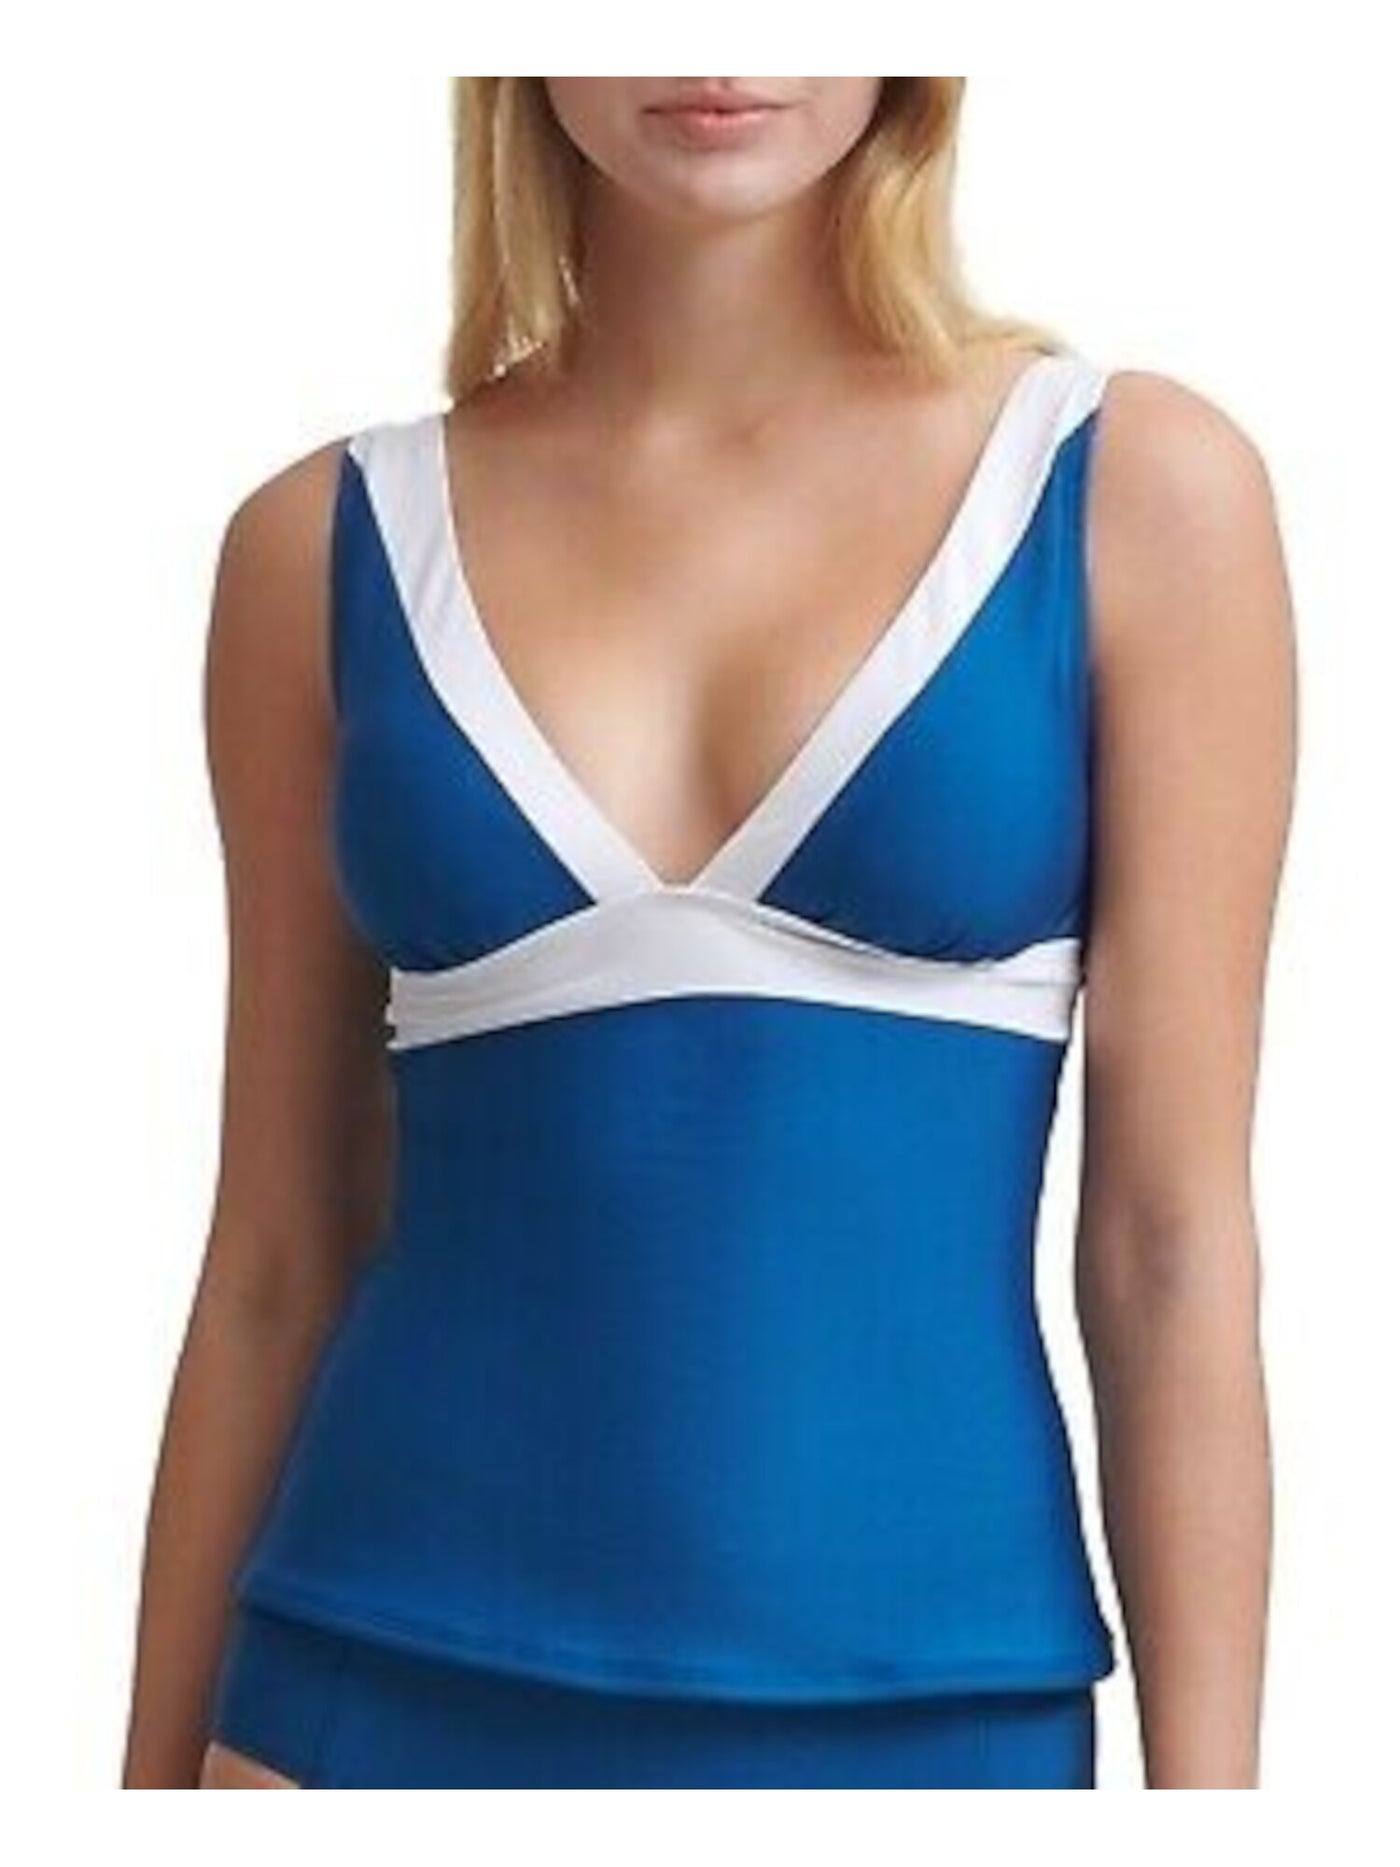 DKNY Women's Blue Color Block Removable Soft Cups Deep V Neck Adjustable Tankini Swimsuit Top L